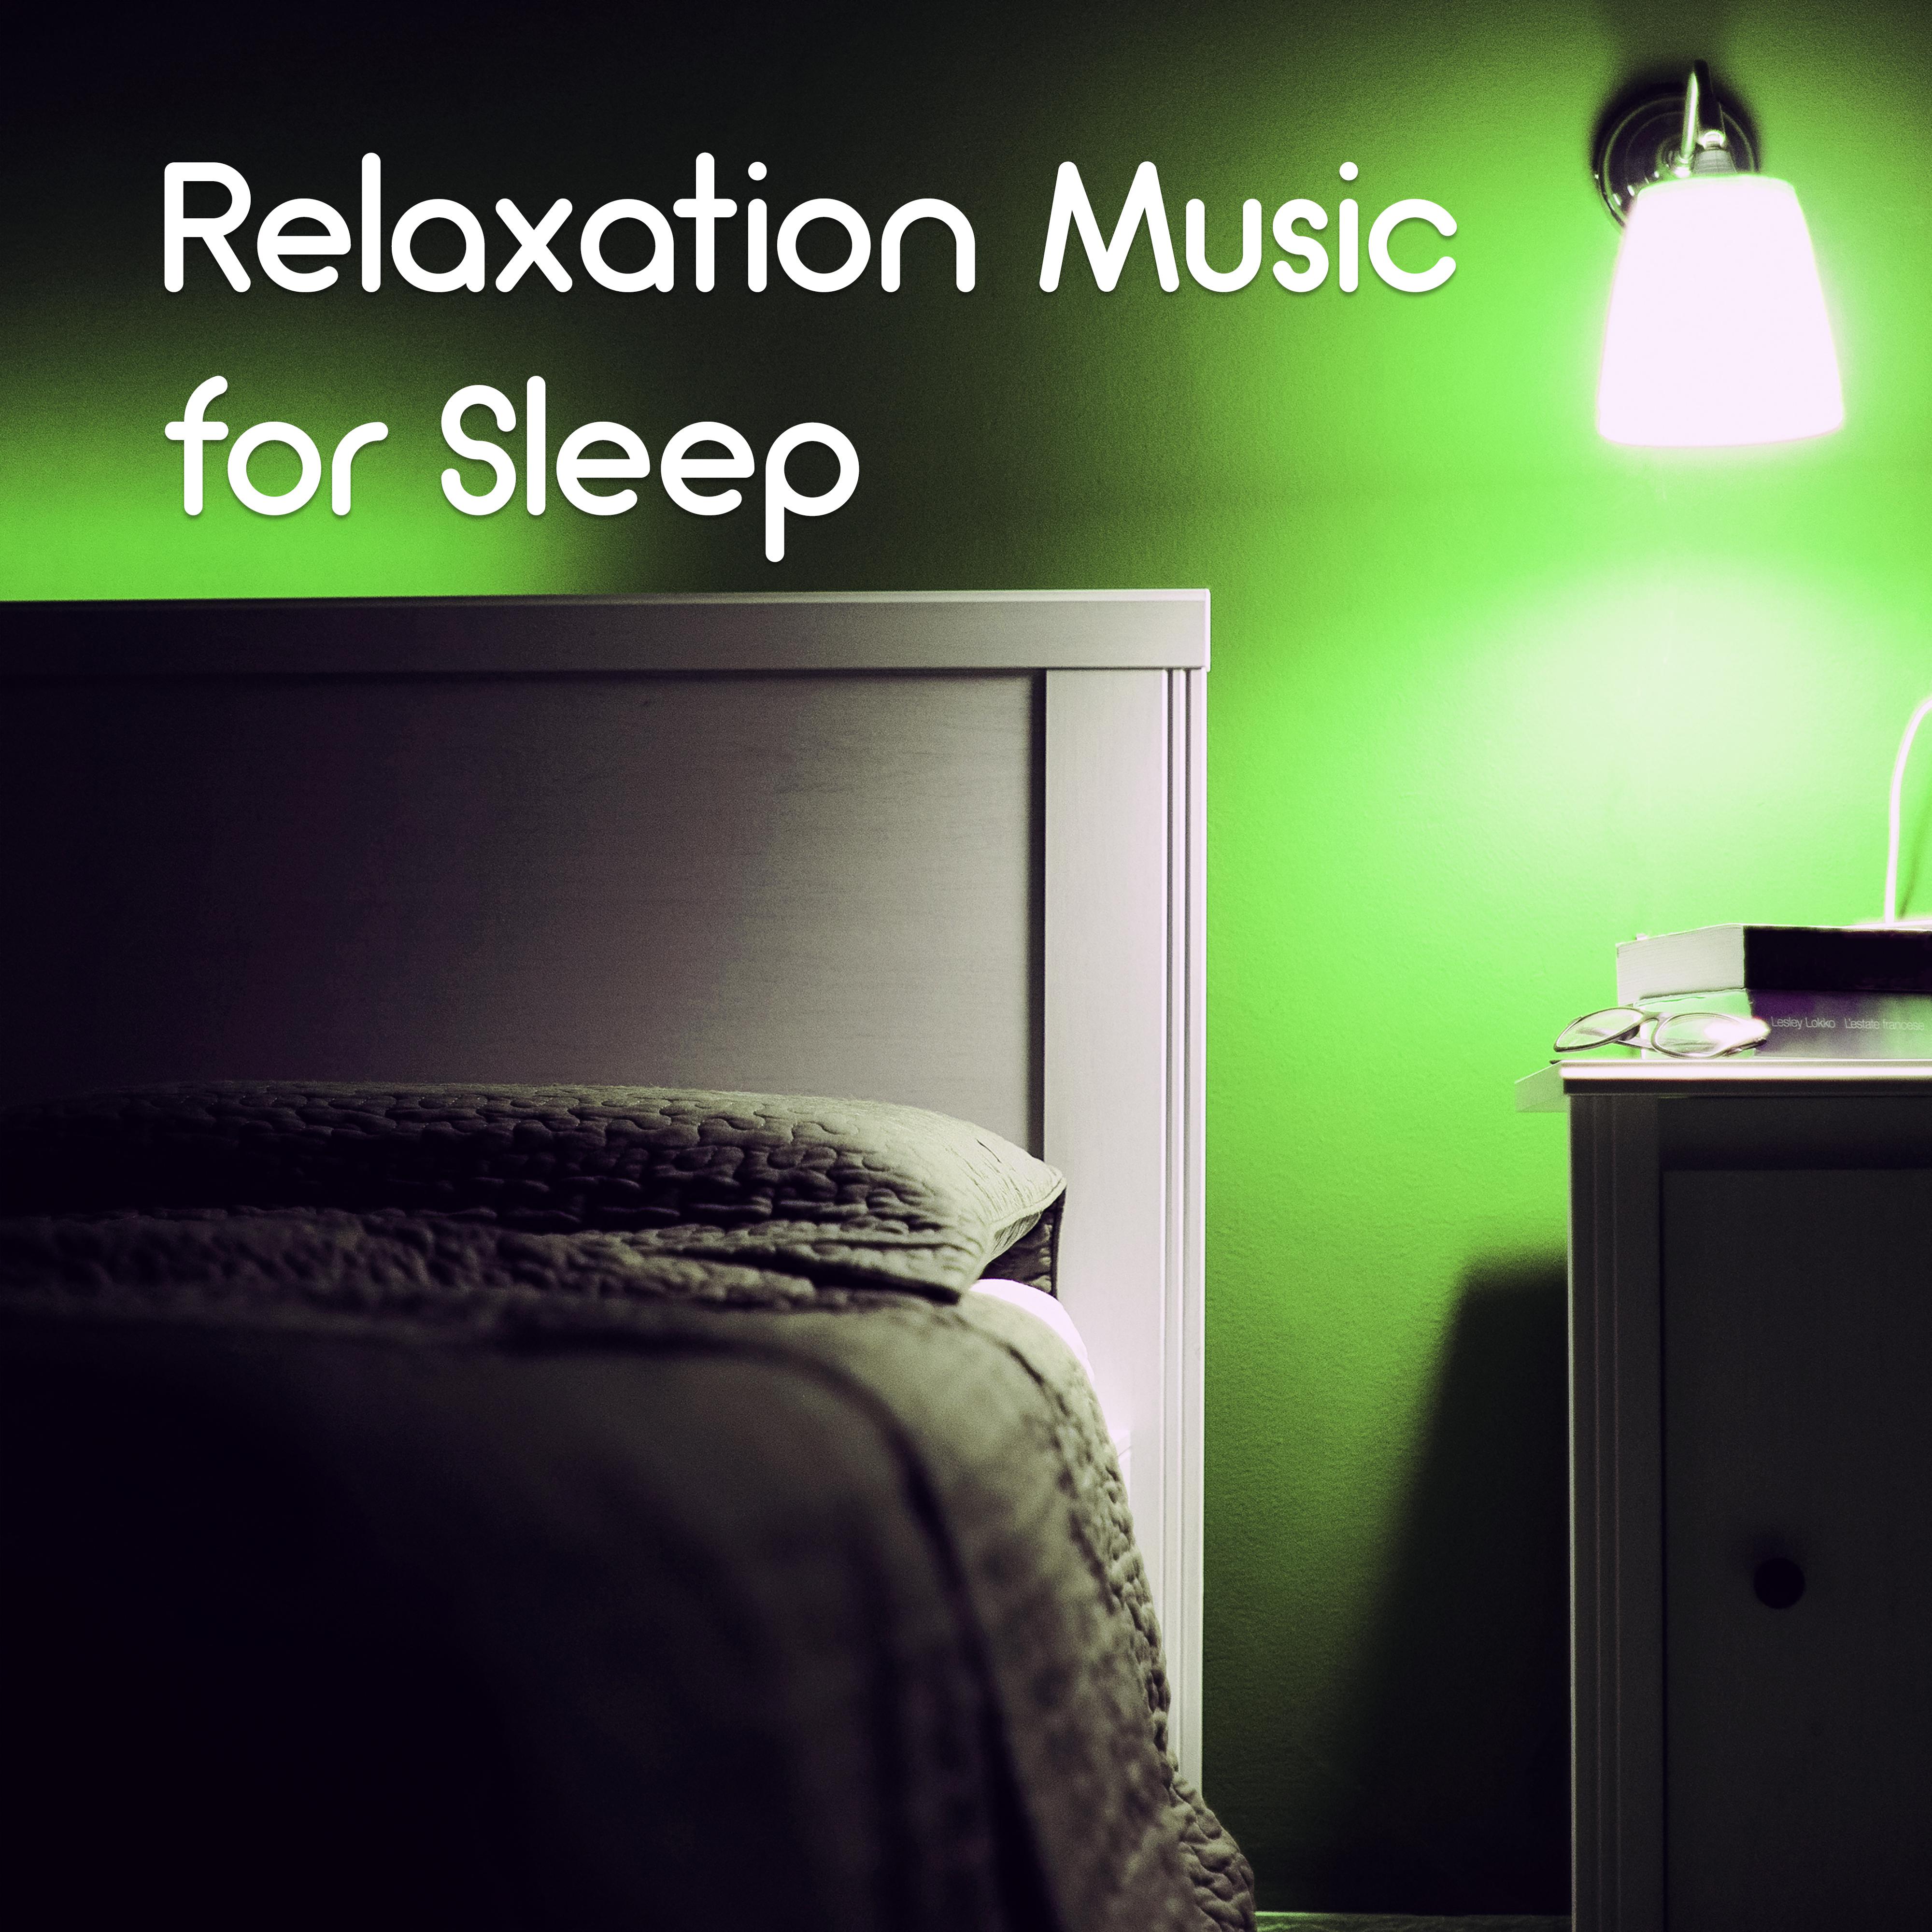 Relaxation Music for Sleep  Soothing Nature Music for Sleep Better,  Easy Sleep Music, Lower Blood Pressure, Fall Asleep Easily, Peaceful New Age Sounds for Sleep